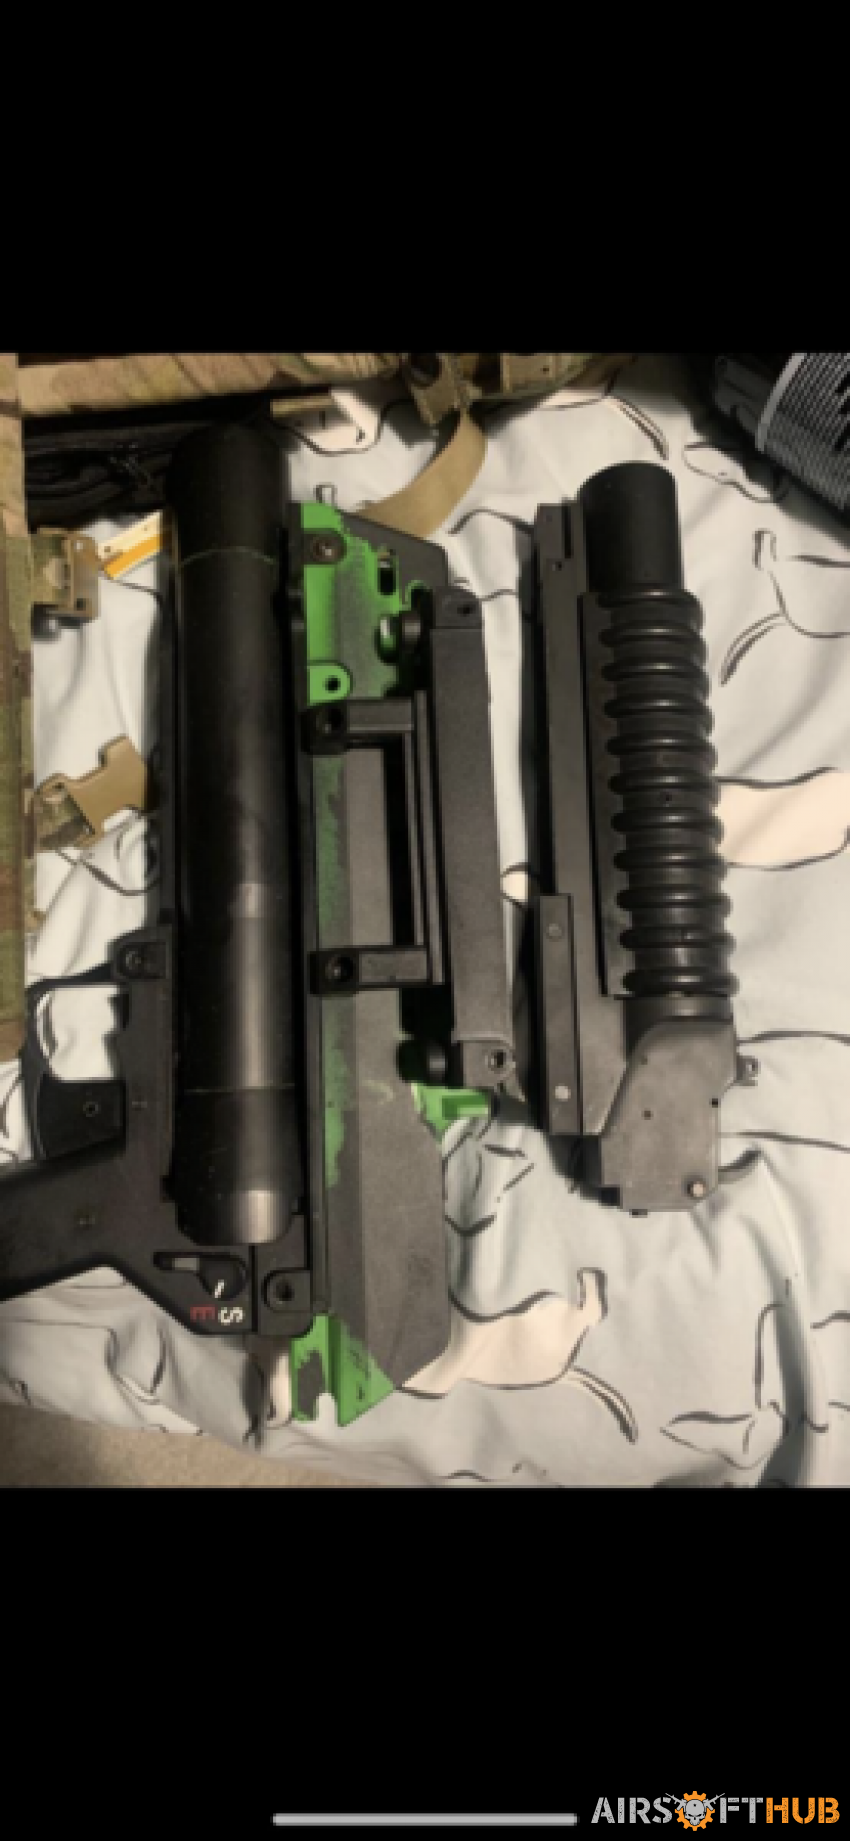 airsoft grenade launcher - Used airsoft equipment